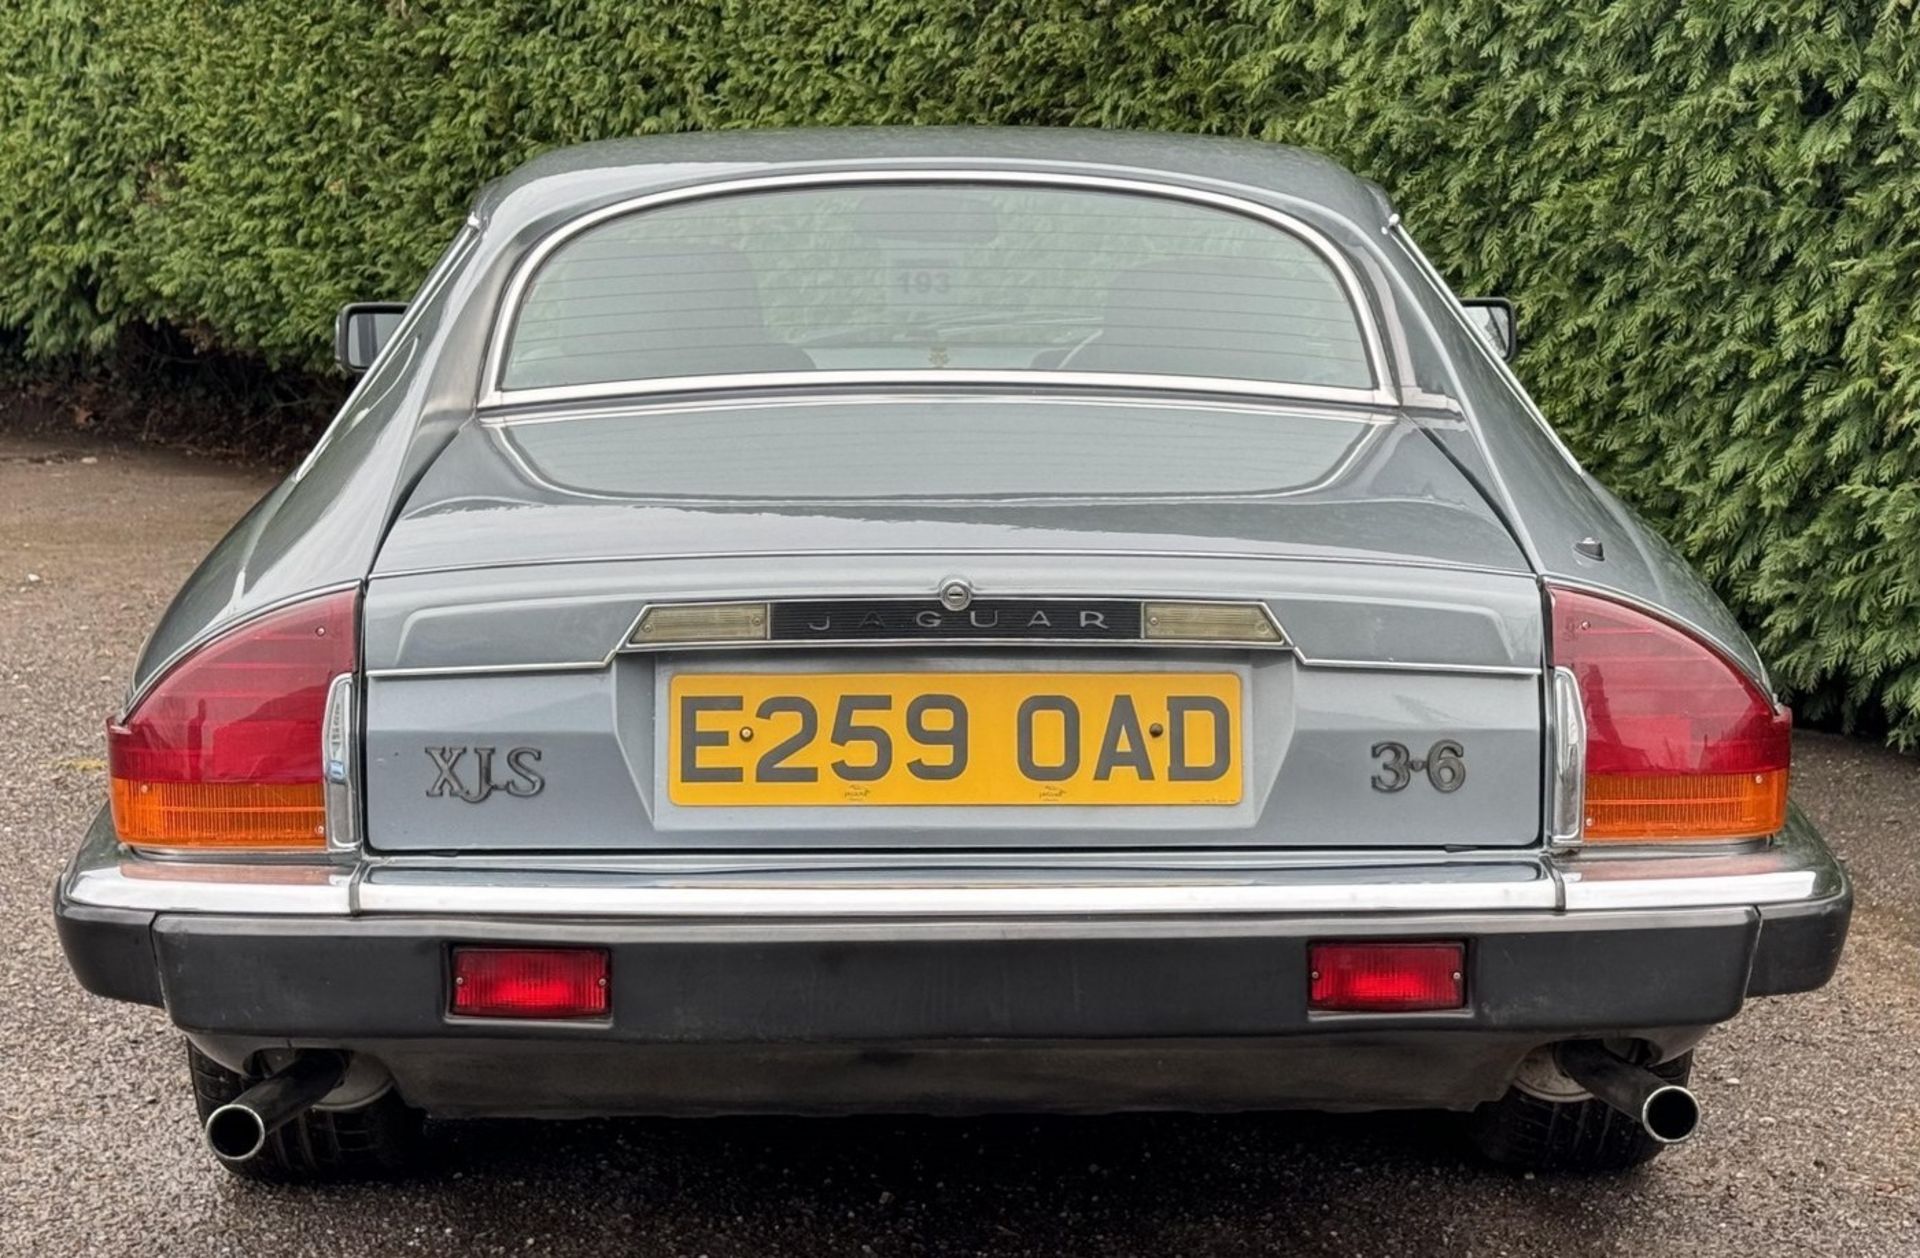 1988 Jaguar XJ-S 3.6 Coupe Registration number E259 OAD Metallic light blue with a half leather - Image 7 of 24